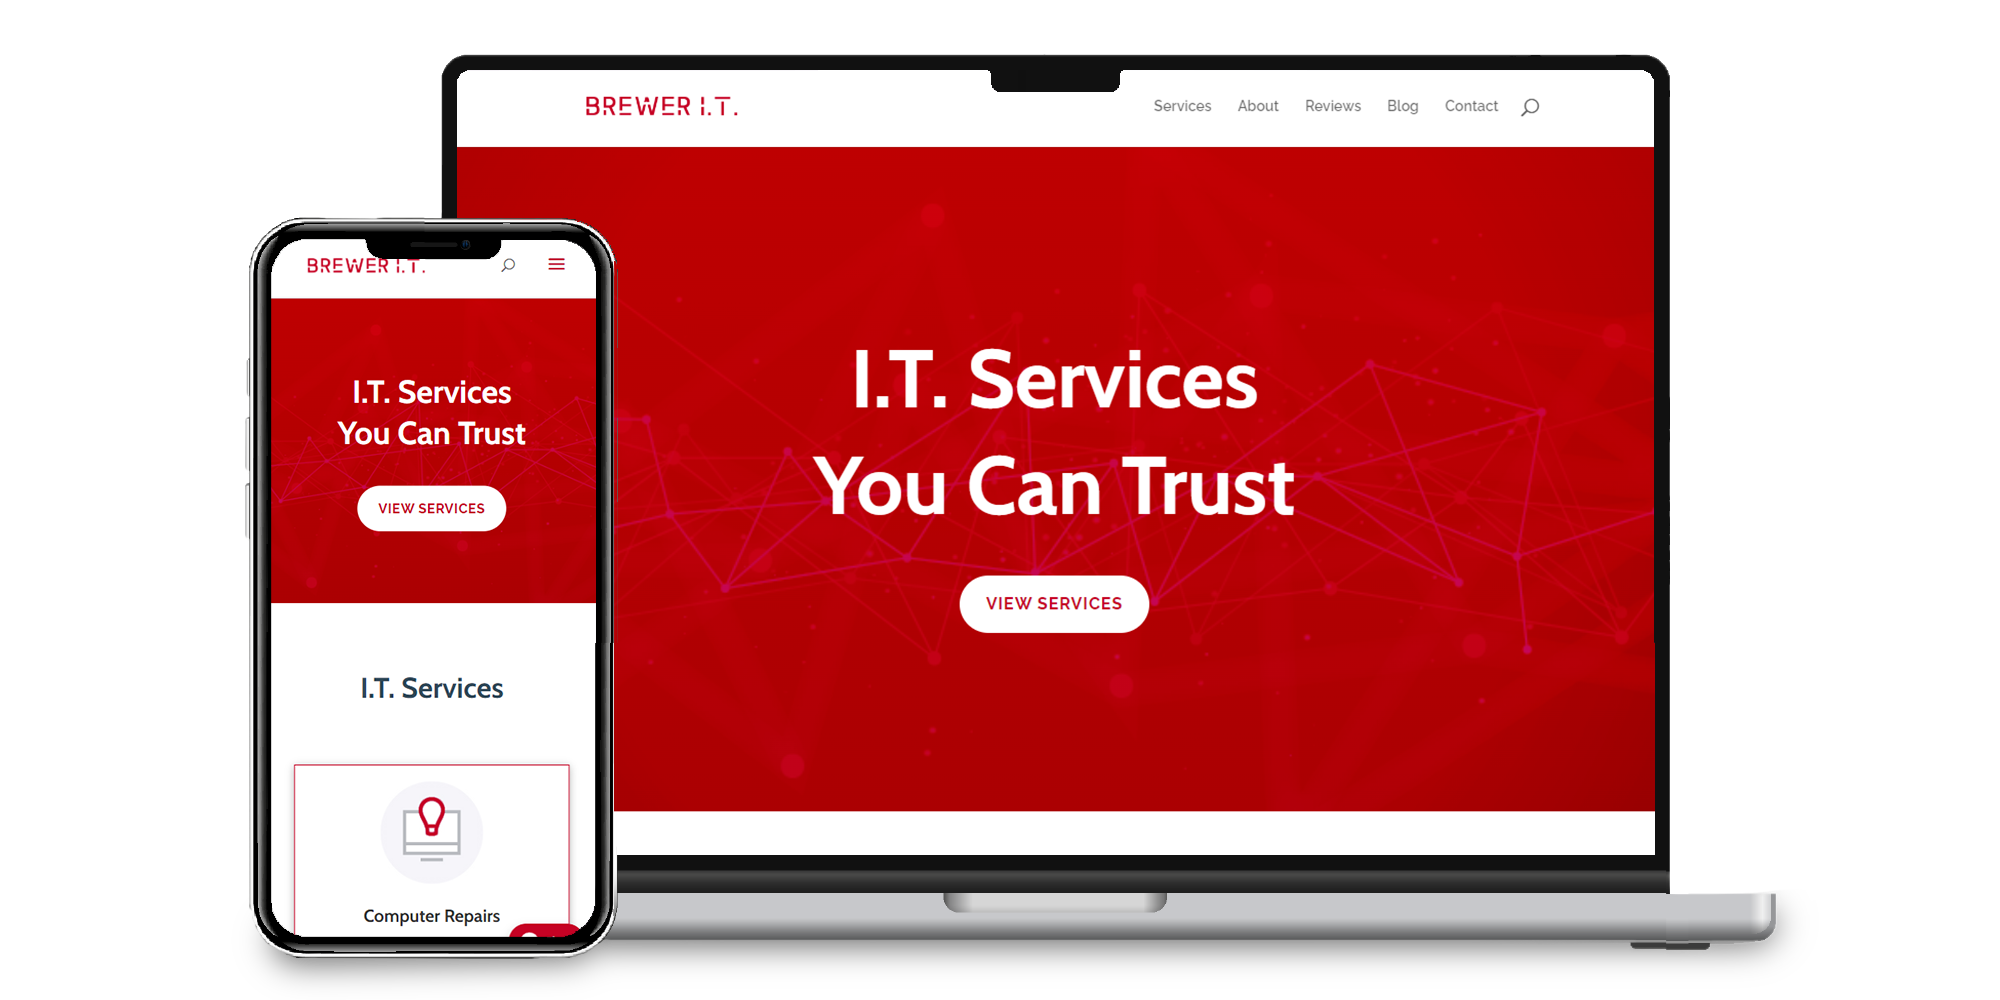 BRewer I.T. Homepage